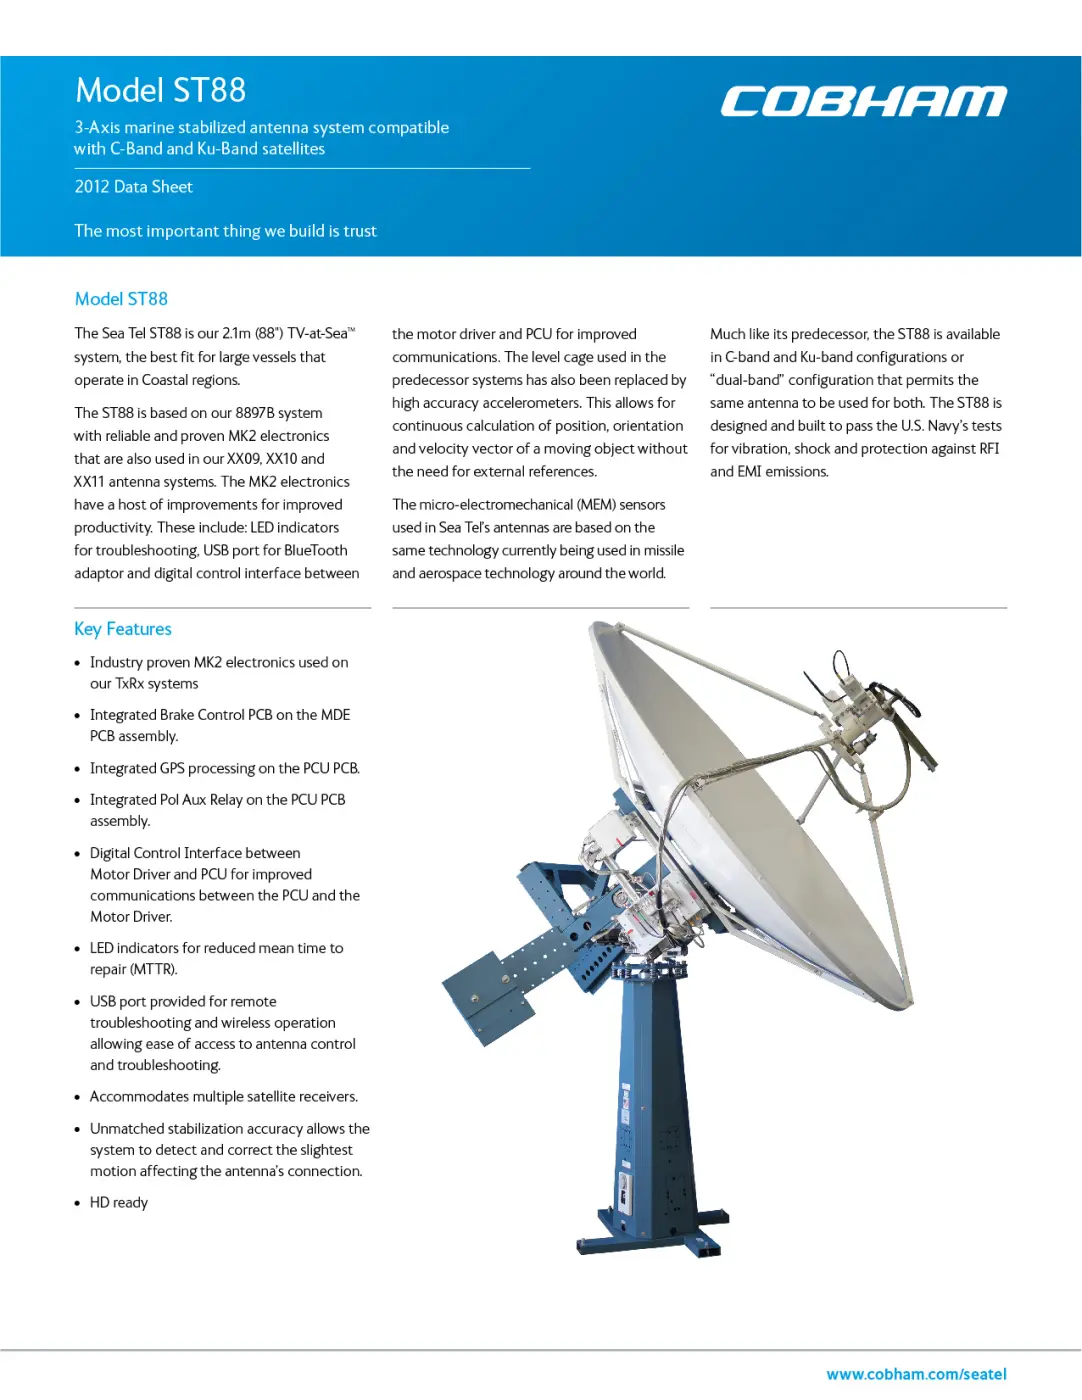 Data sheet for Cobham ST88, 3-Axis marine stabilized antenna system compatible with C-Band and Ku-Band satellites